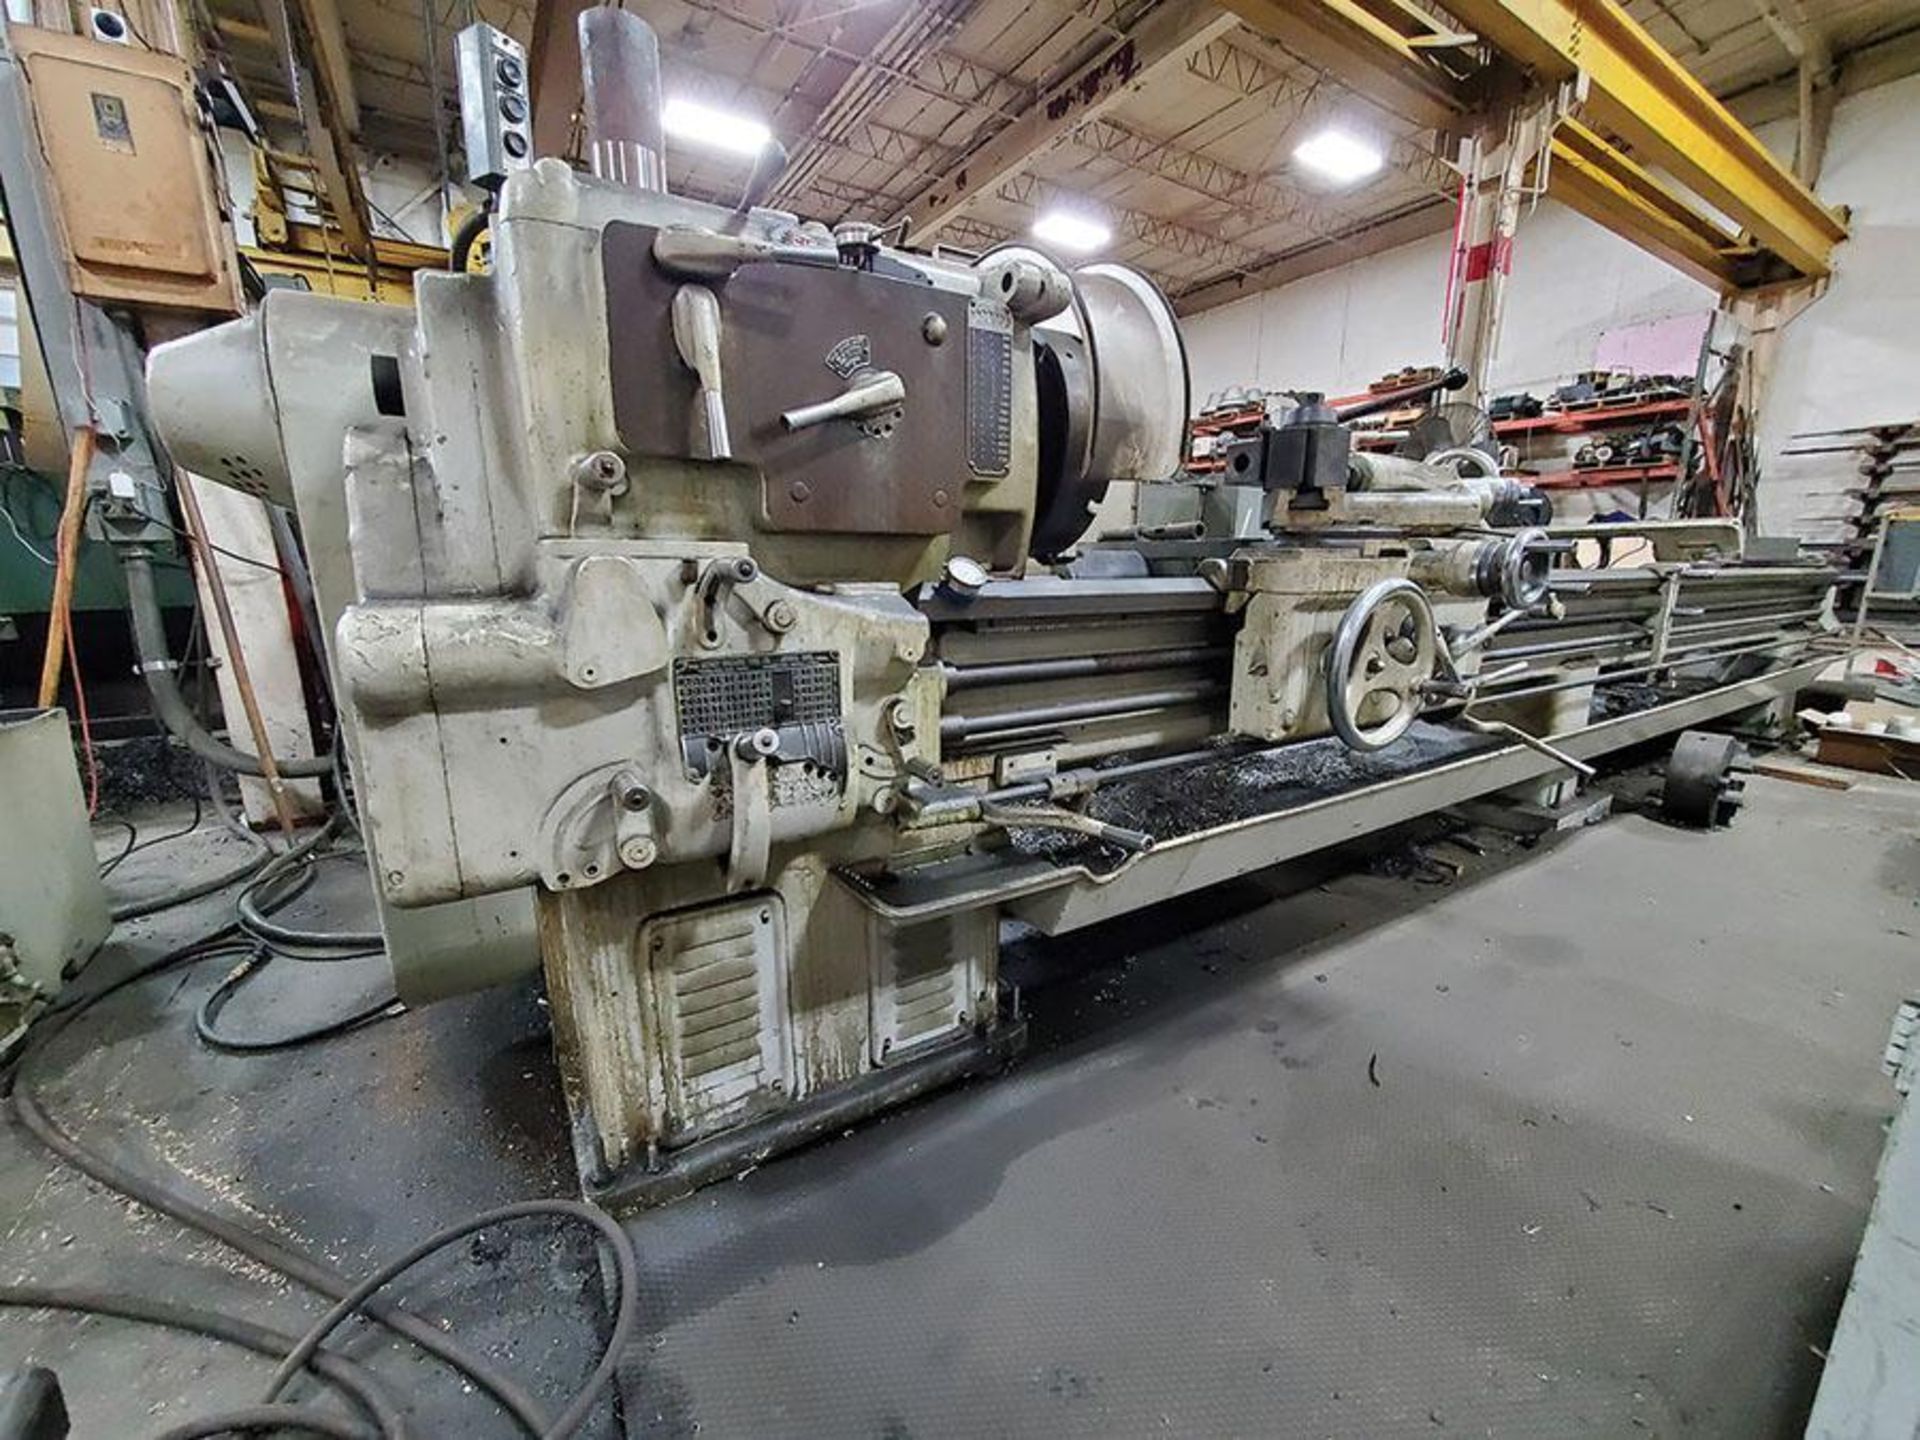 SYDNEY ENGINE LATHE, 16' BED, 2'' BAR THROUGH SPINDLE, 24-720 SPINDLE SPEEDS, TAILSTOCK, CROSS - Image 4 of 18